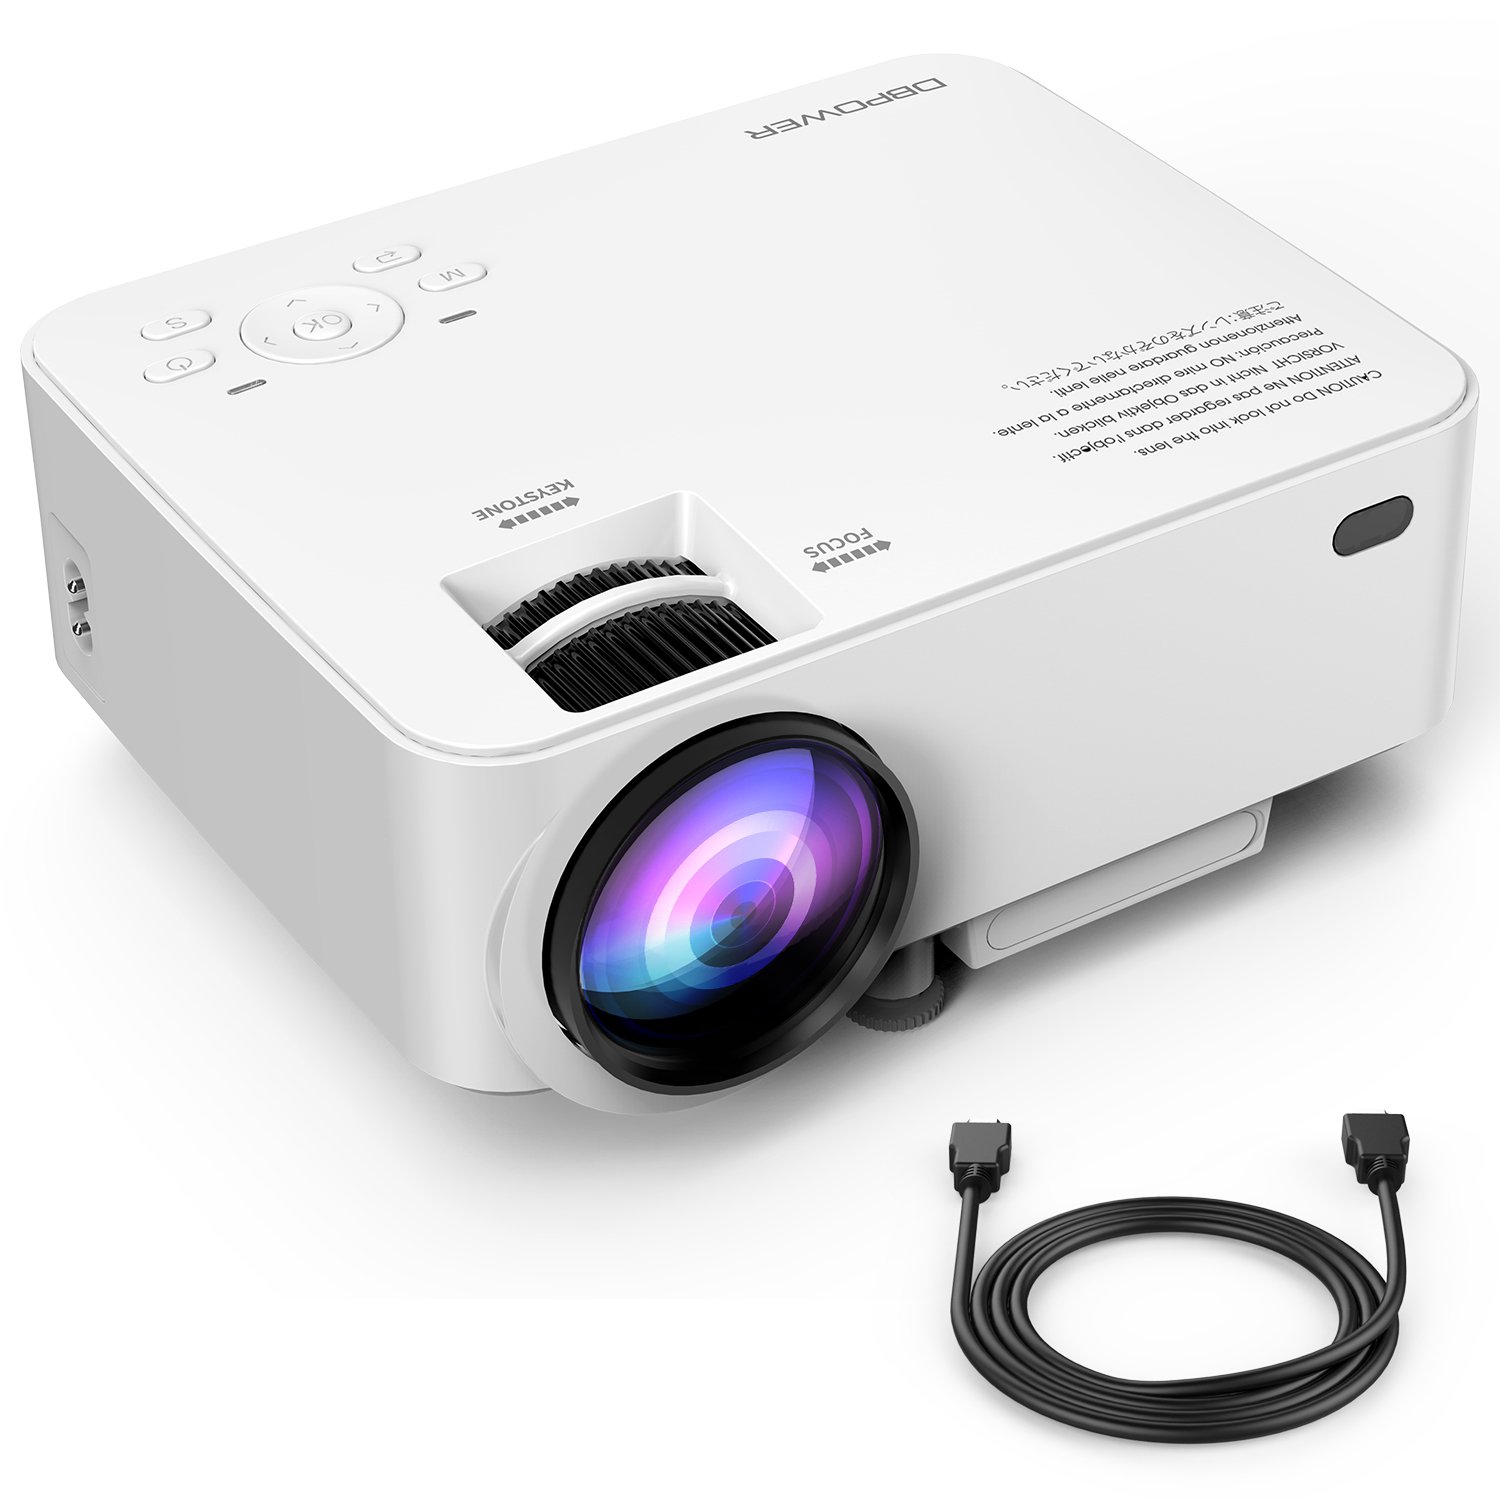 DBPOWER T20 Projector Review